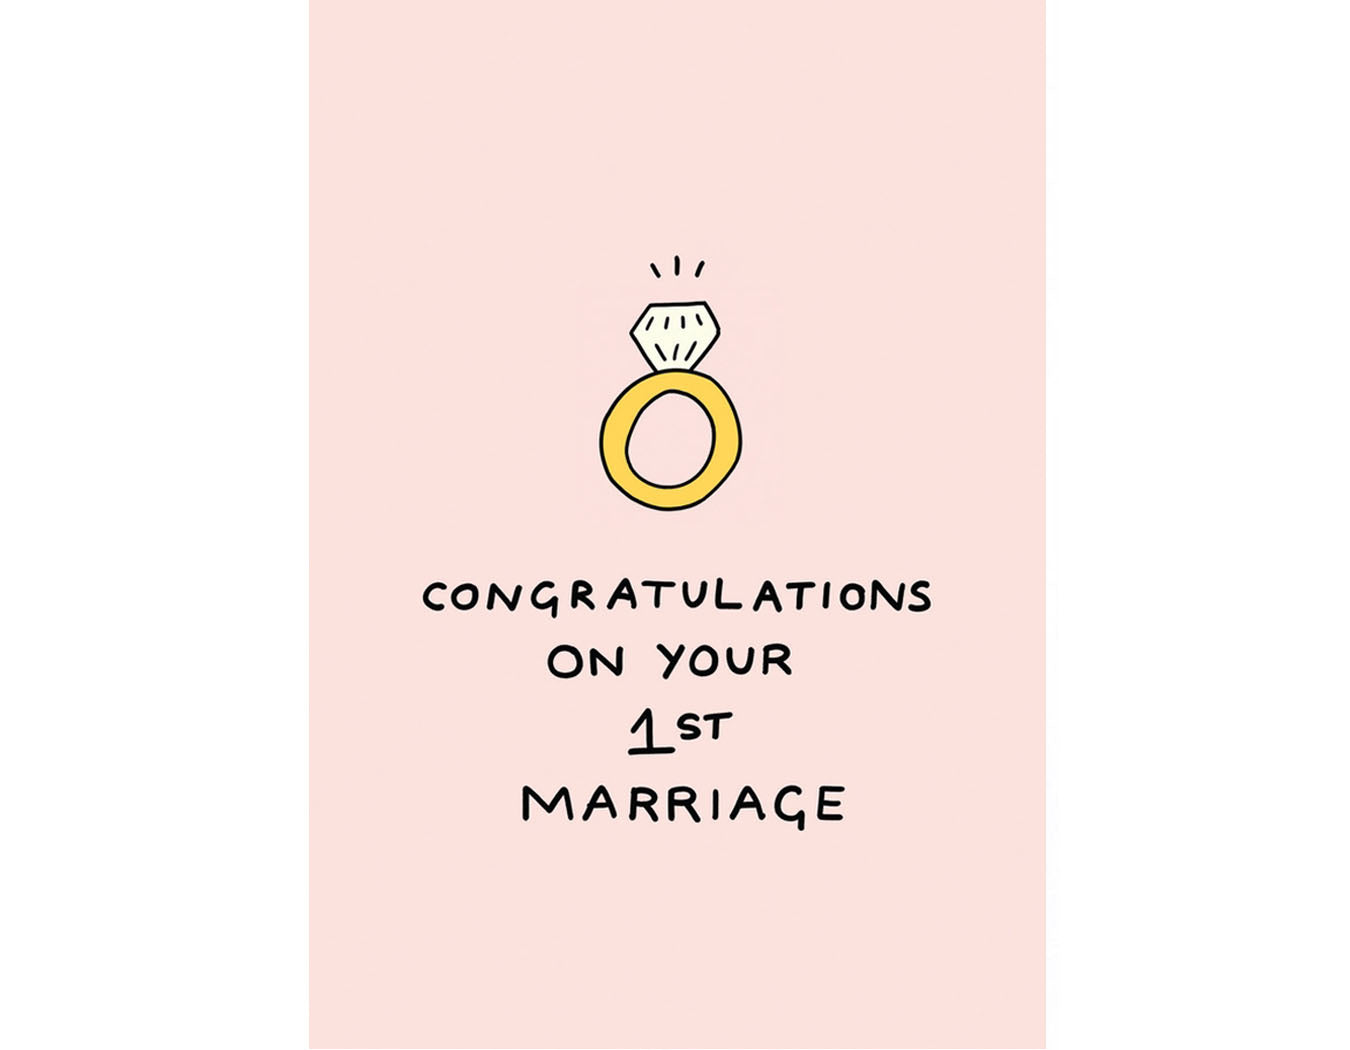 pale pink background with illustration of diamond engagement ring text reads congratulations on your 1st marriage